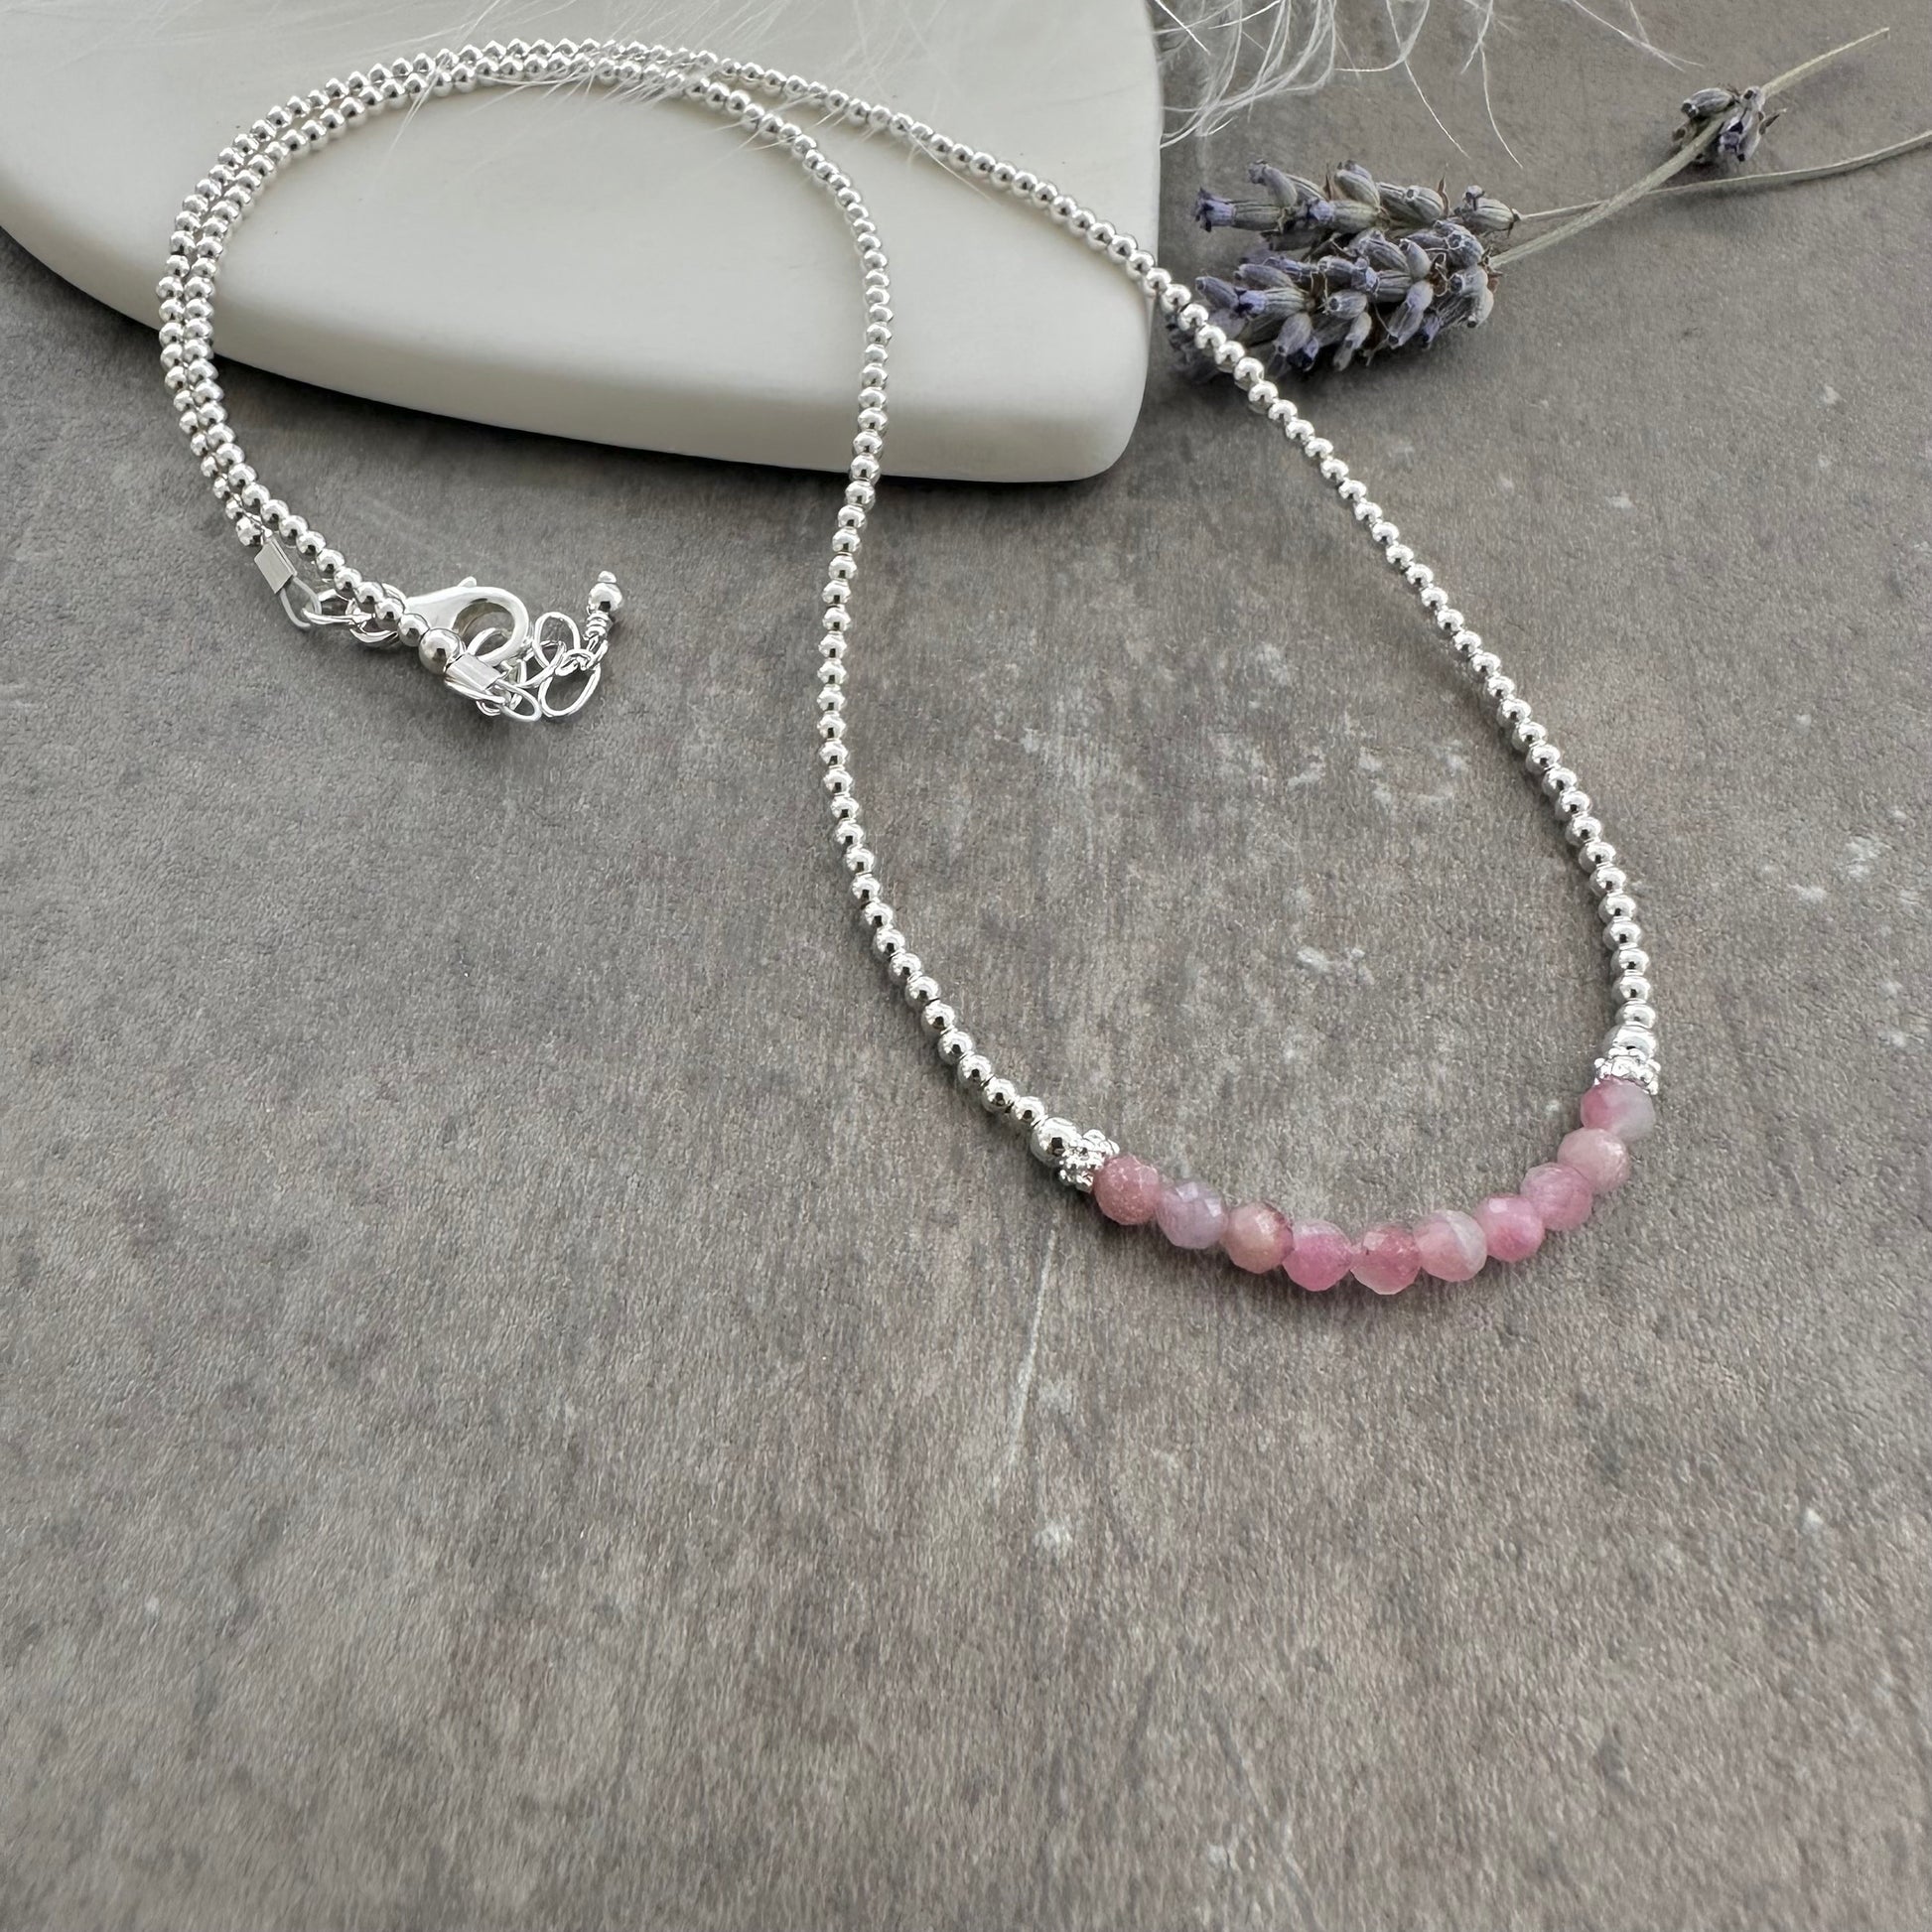 Thin Pale Pink Tourmaline and Sterling Silver Bead Necklace, October Birthstone